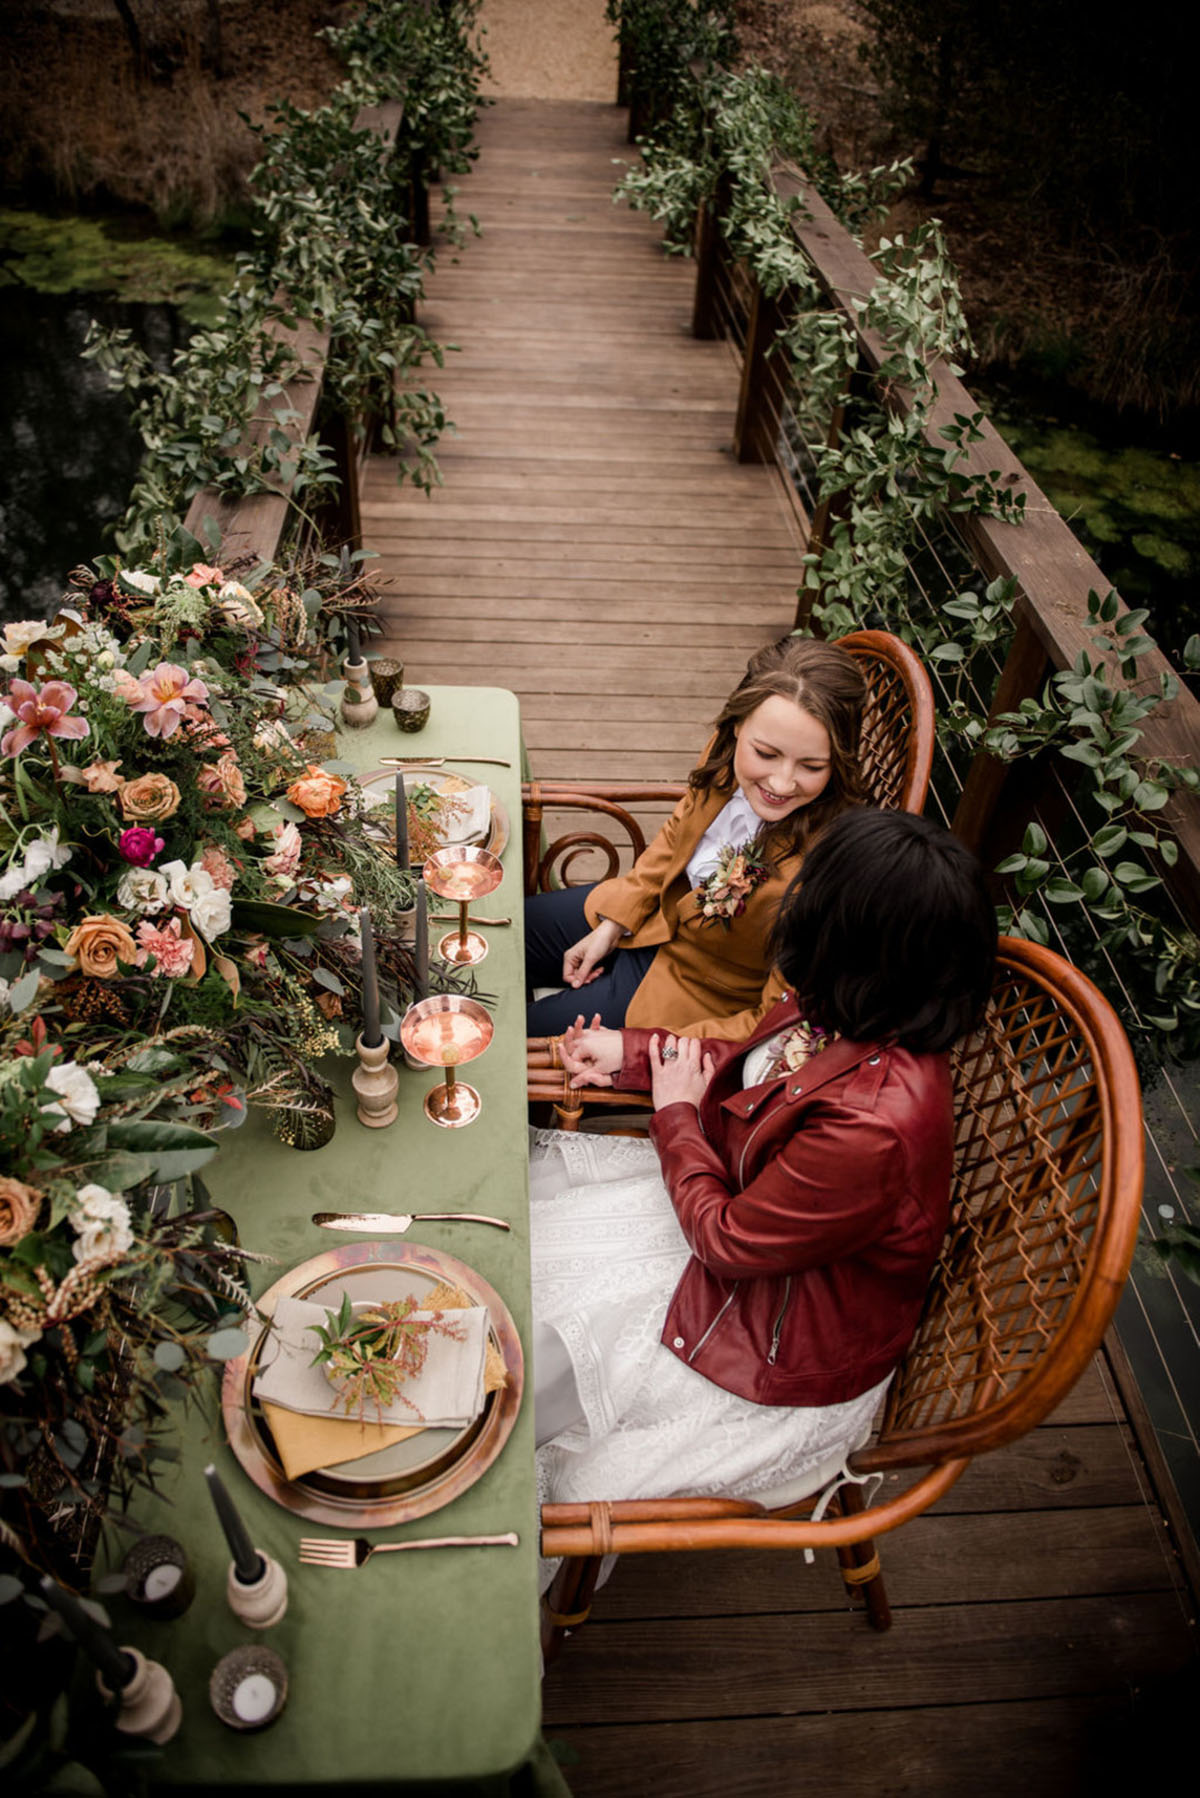 Floral bohemian forest wedding inspiration on a bridge two brides lesbian wedding long white dress tan suit jacket red leather jacket romantic moody sweetheart table